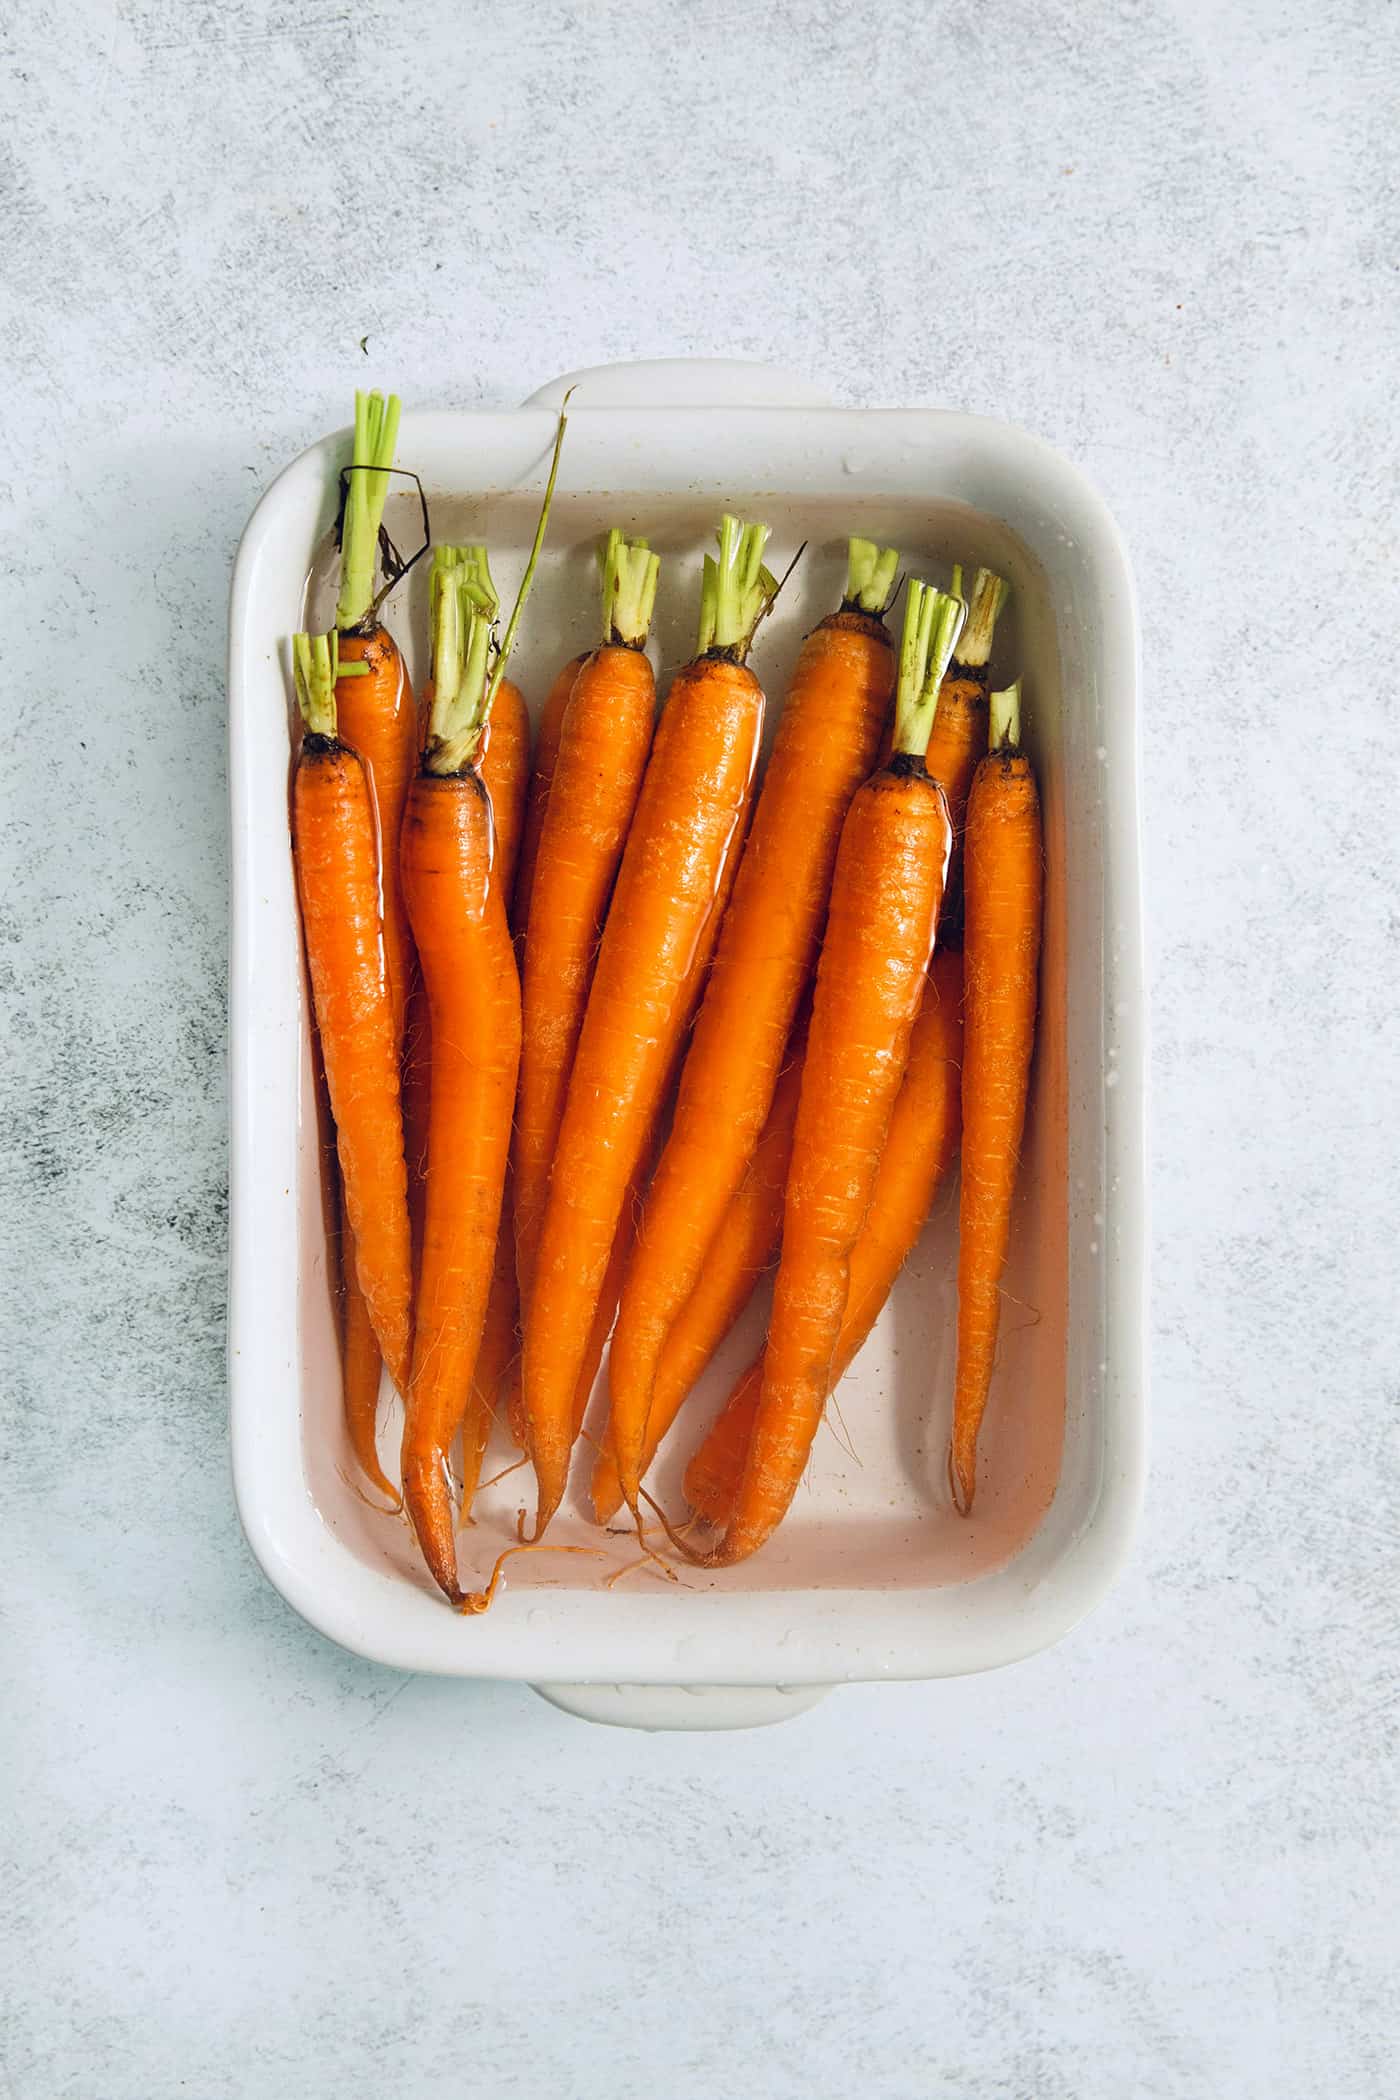 whole carrots in a pan of water